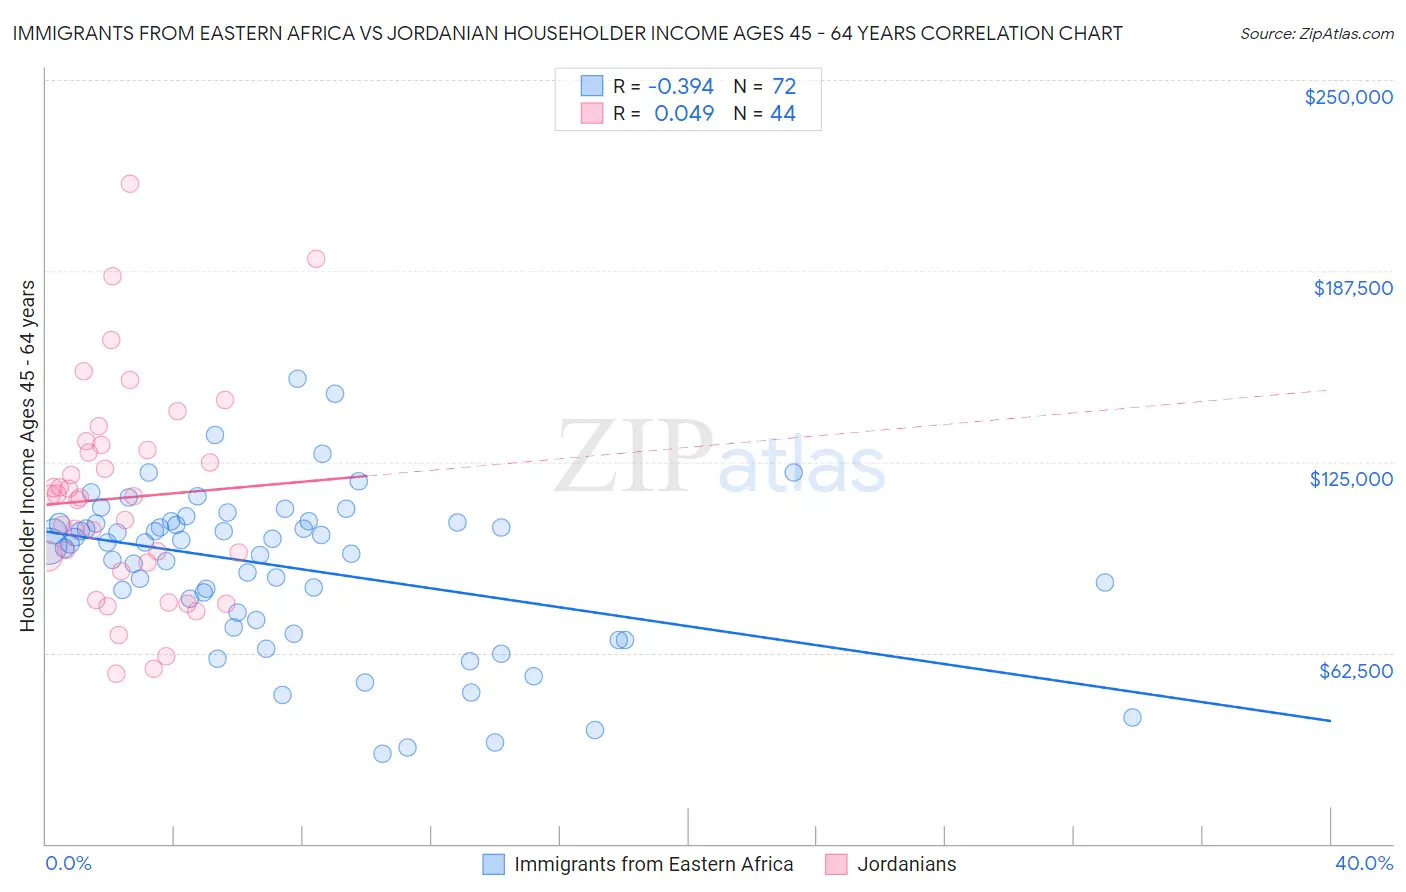 Immigrants from Eastern Africa vs Jordanian Householder Income Ages 45 - 64 years